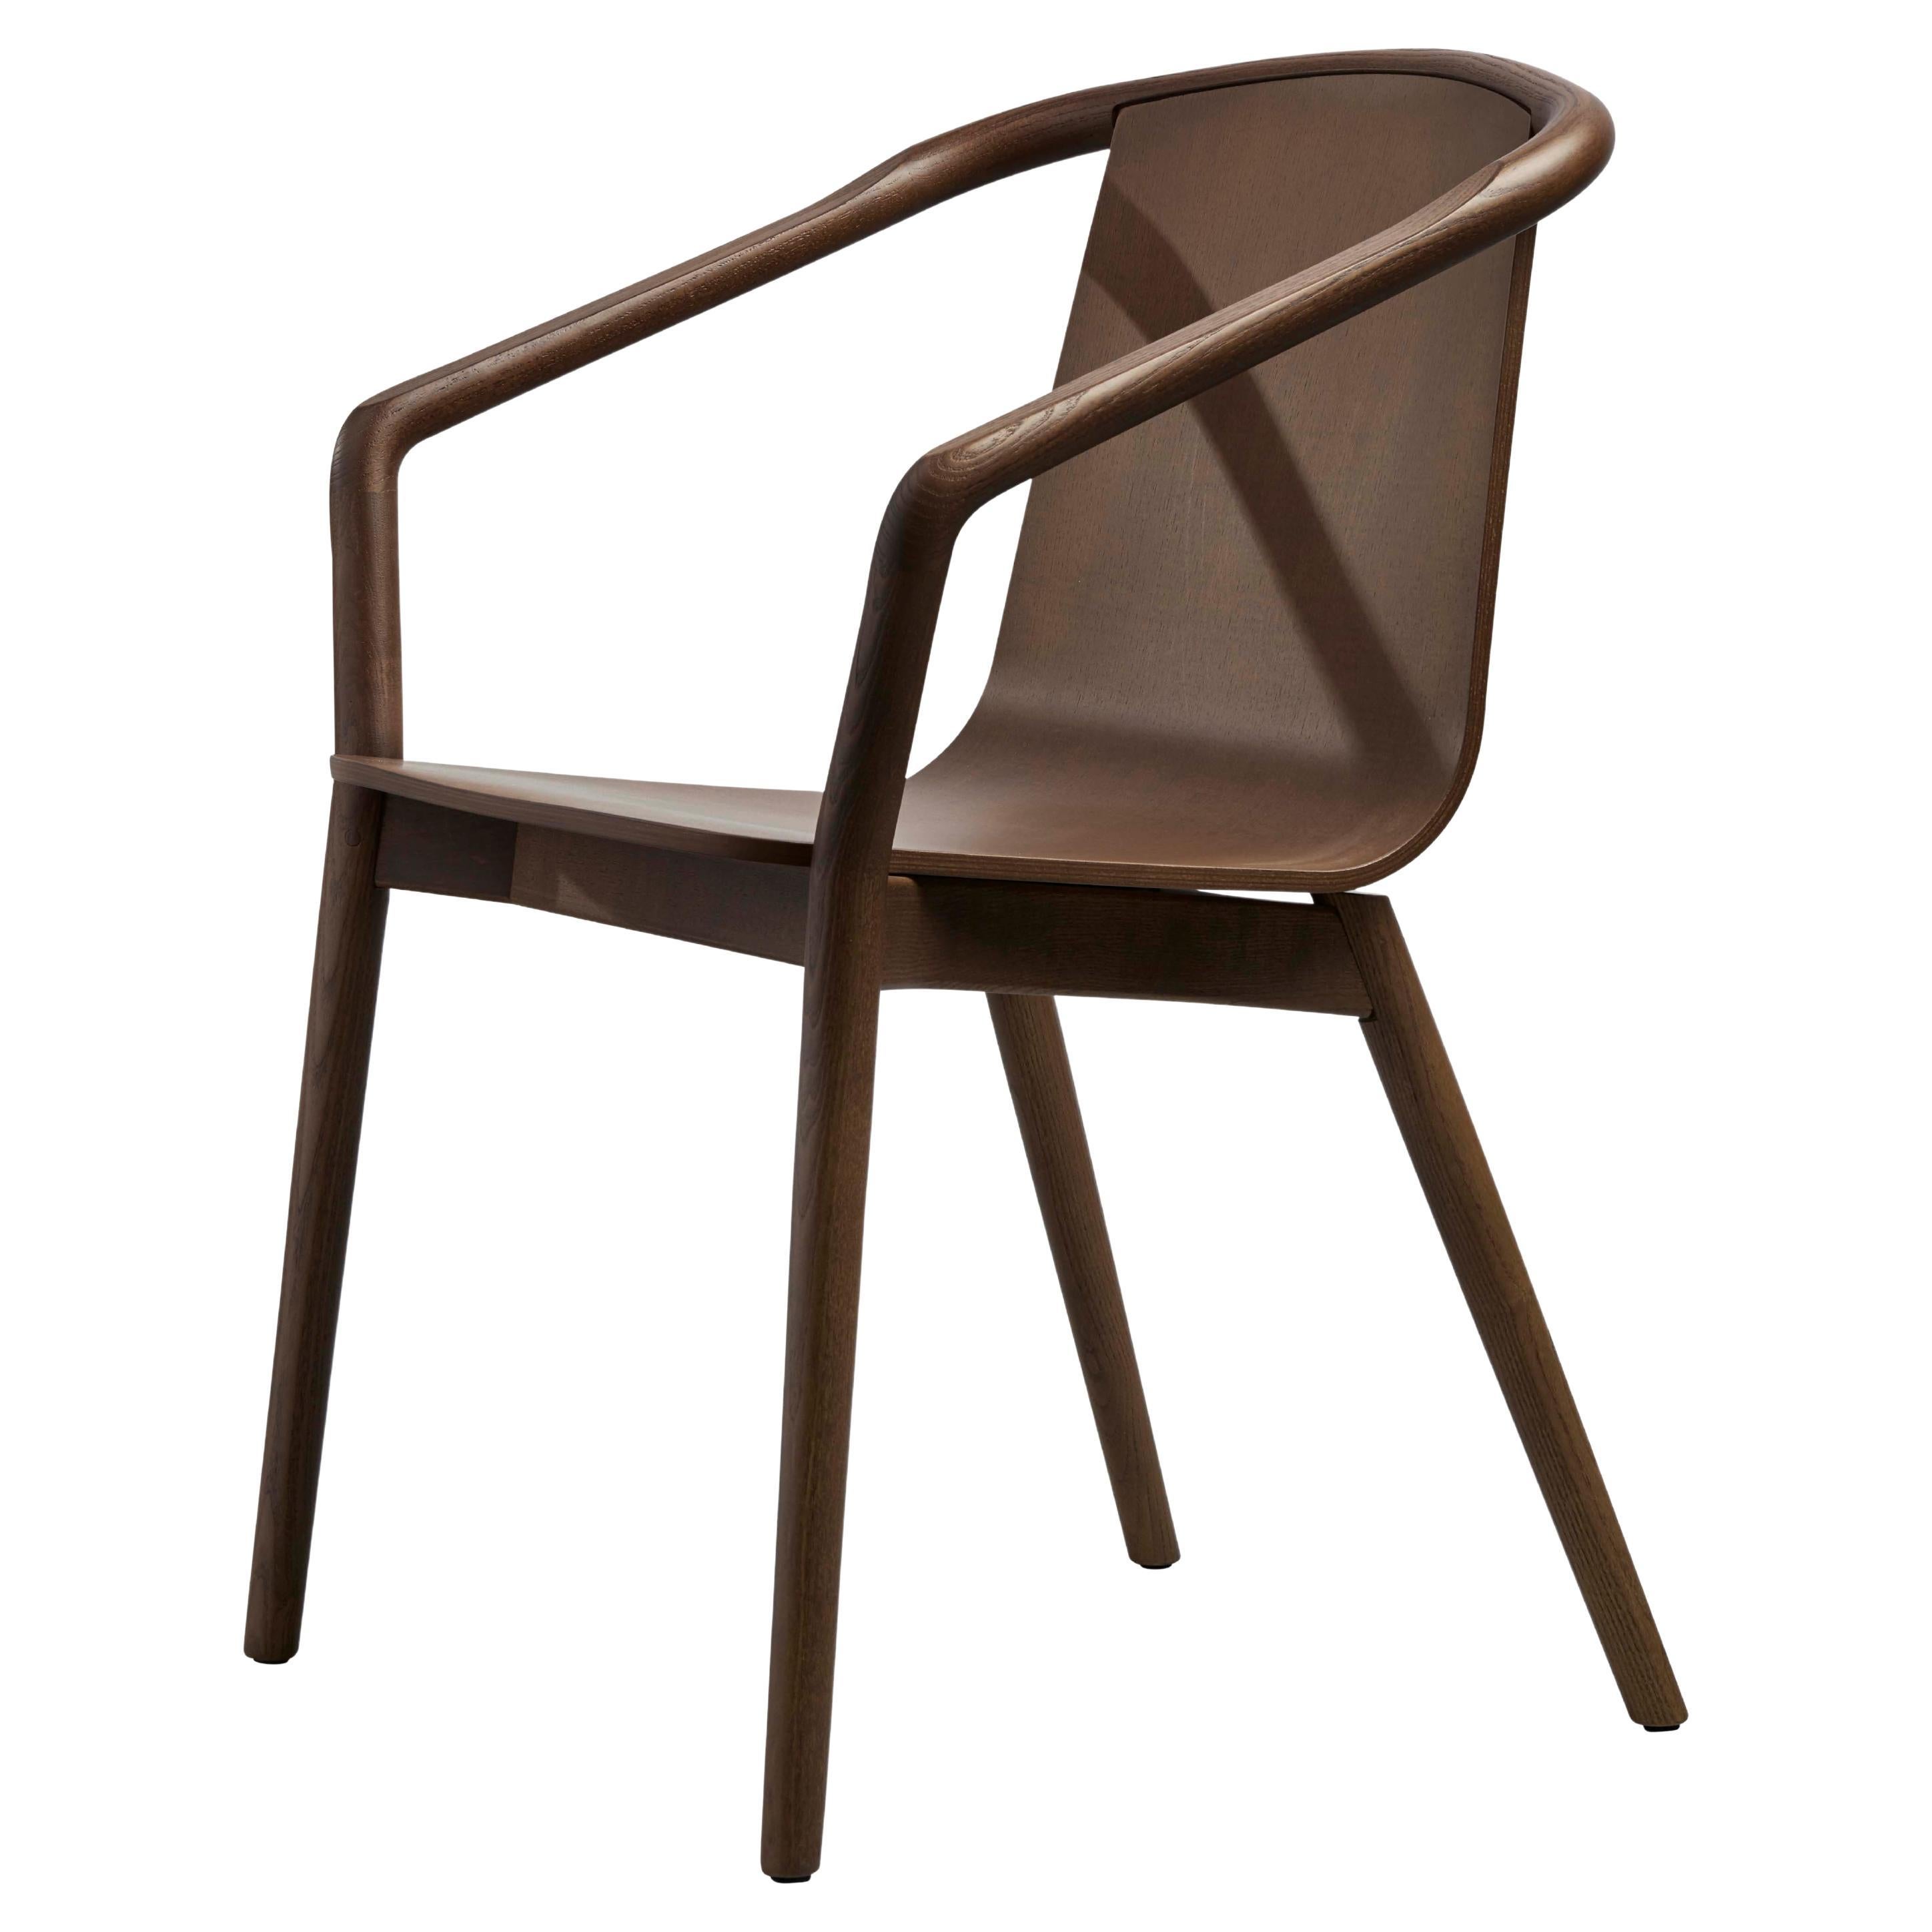 SP01 Thomas Chair in Walnut Stained Ash, Made in Italy